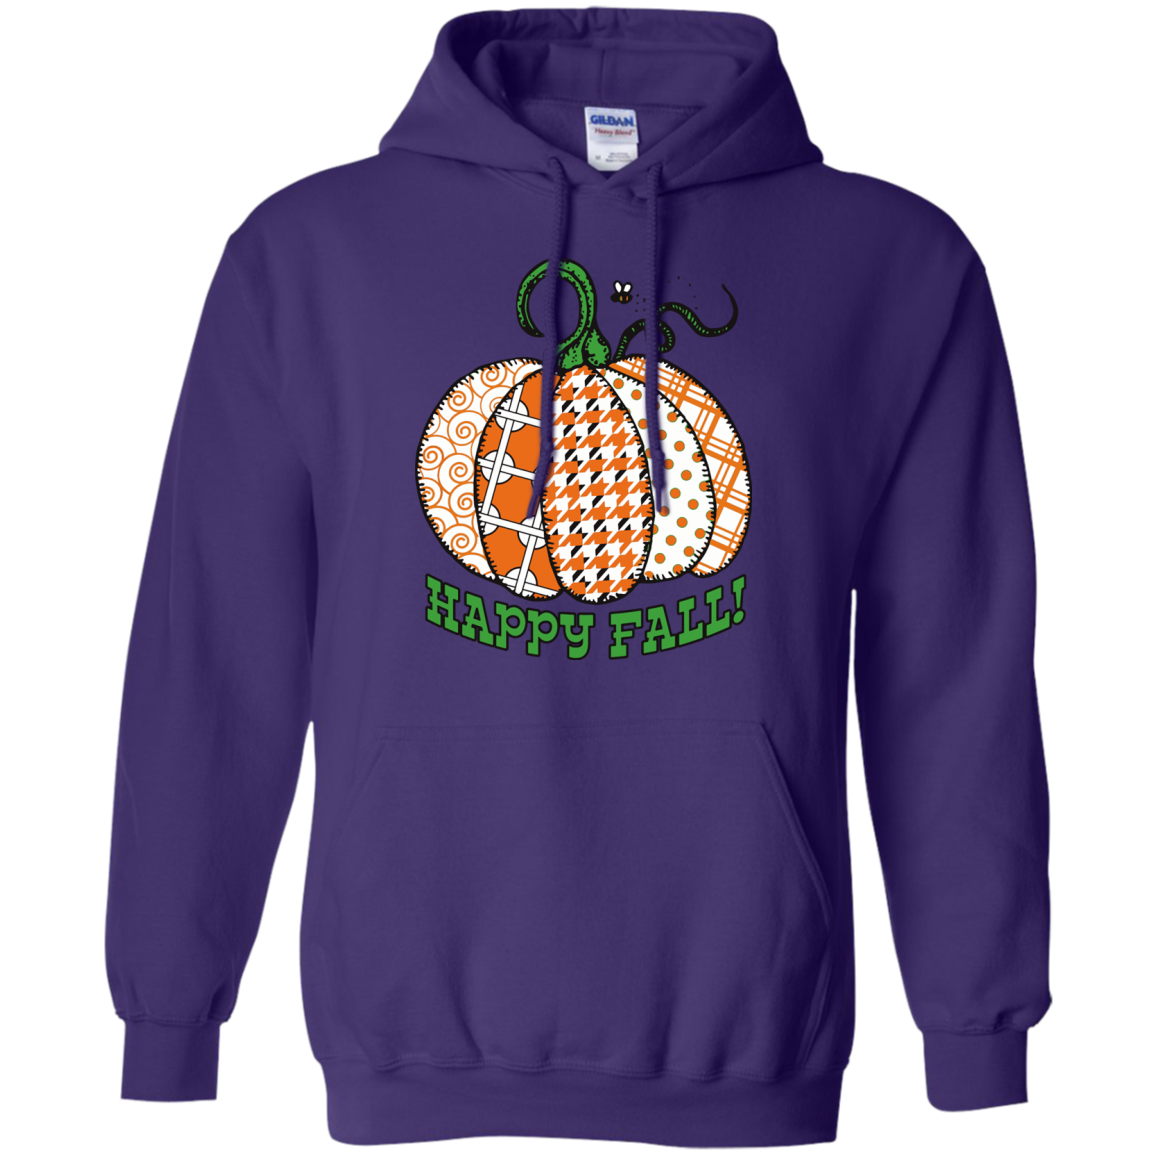 Happy Fall! Pullover Hoodies - Crafter4Life - 11